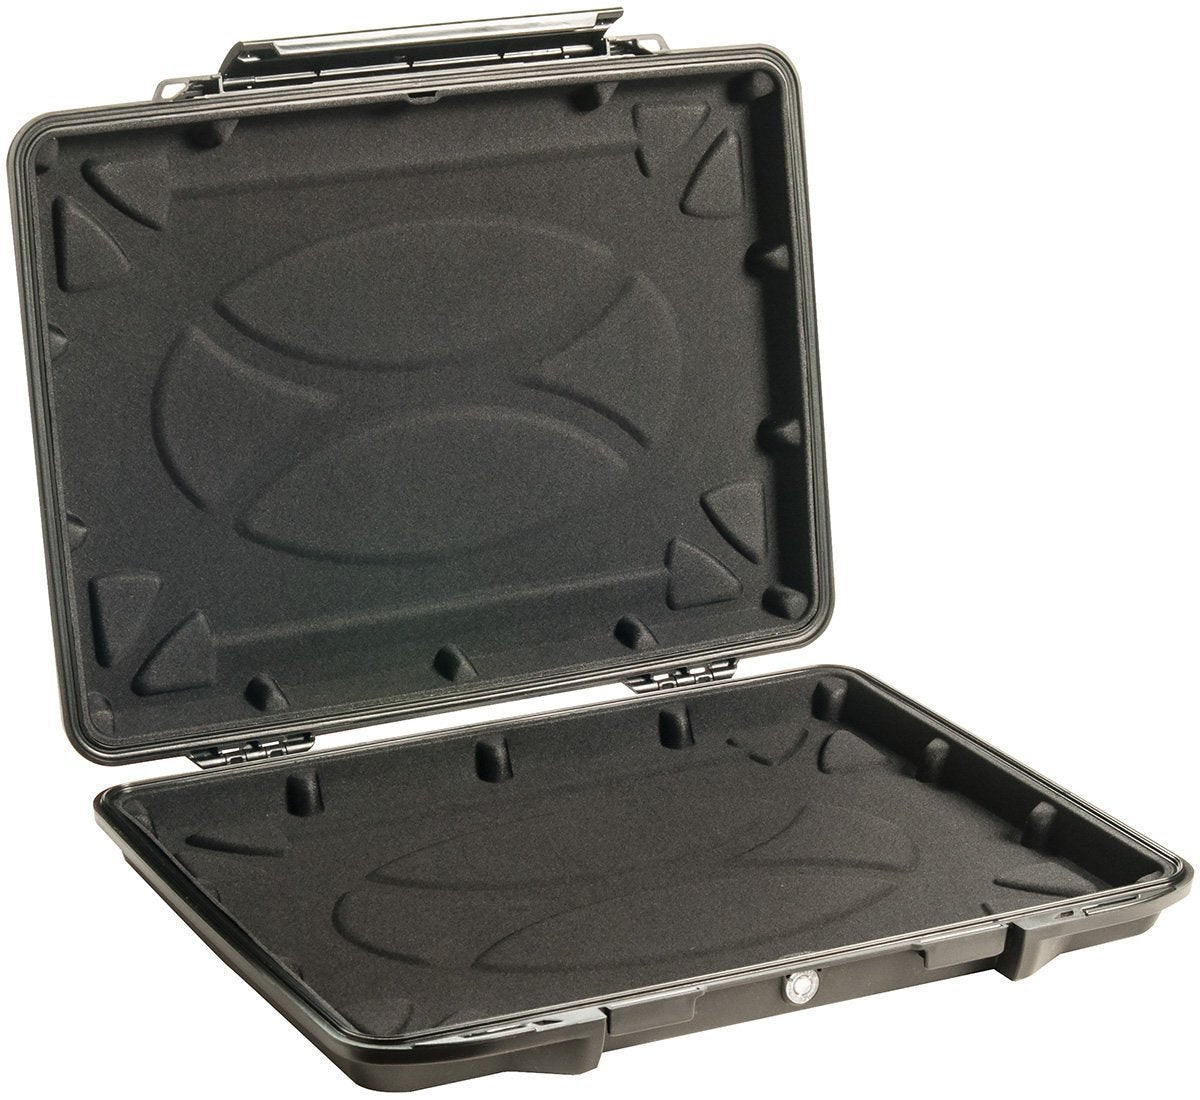 Pelican 1095CC Hardback Case with Liner 15.6" Bags, Packs and Cases Pelican Products Tactical Gear Supplier Tactical Distributors Australia